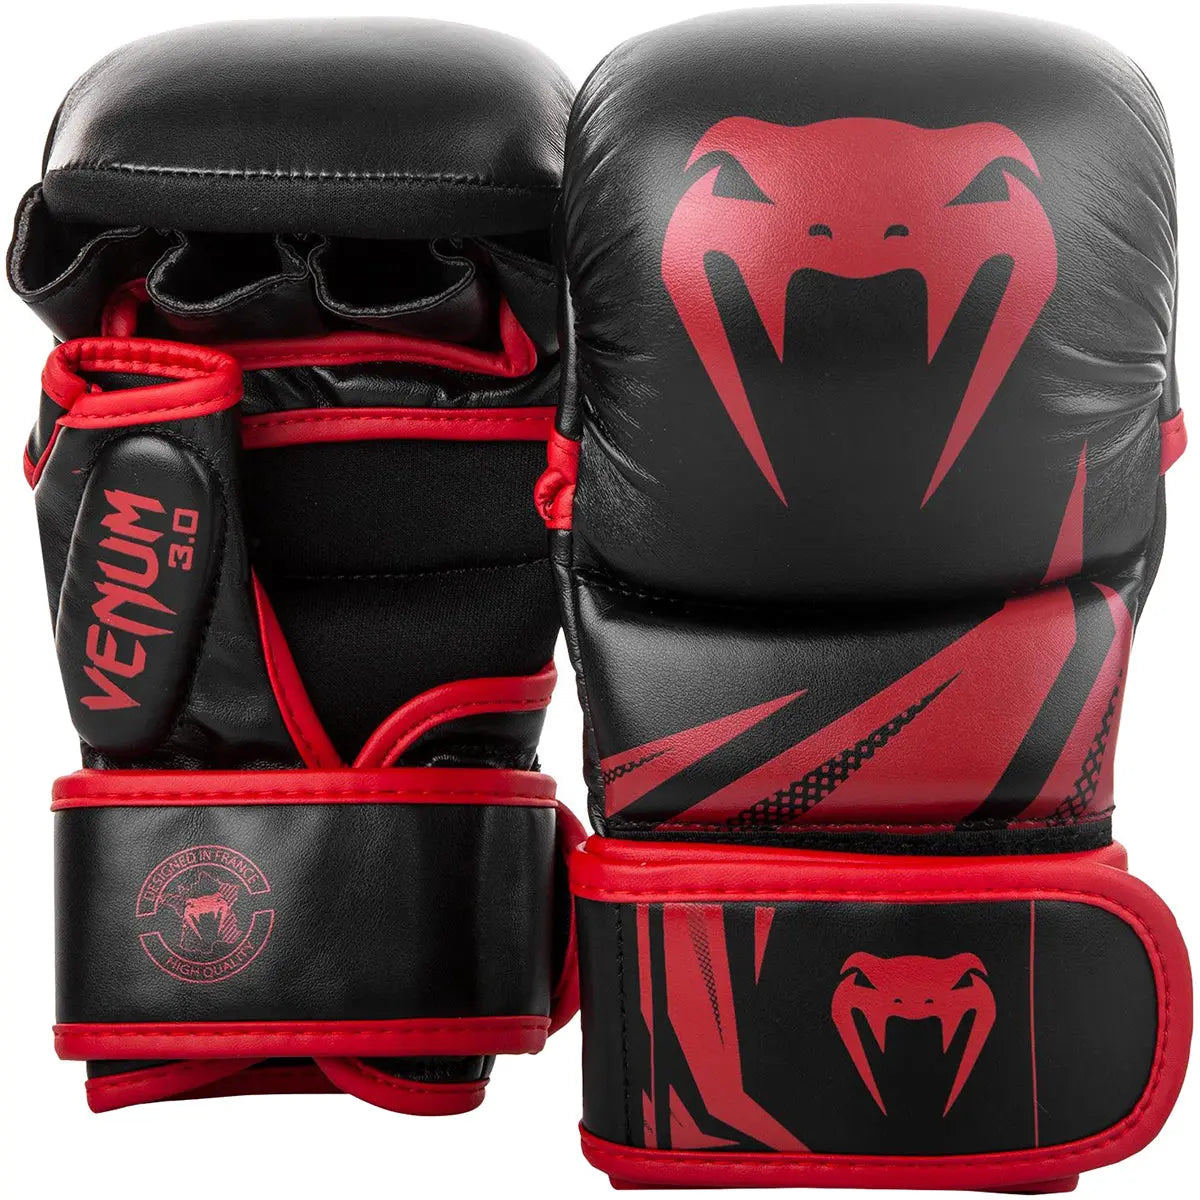 Venum Challenger 3.0 MMA and Boxing Sparring Gloves